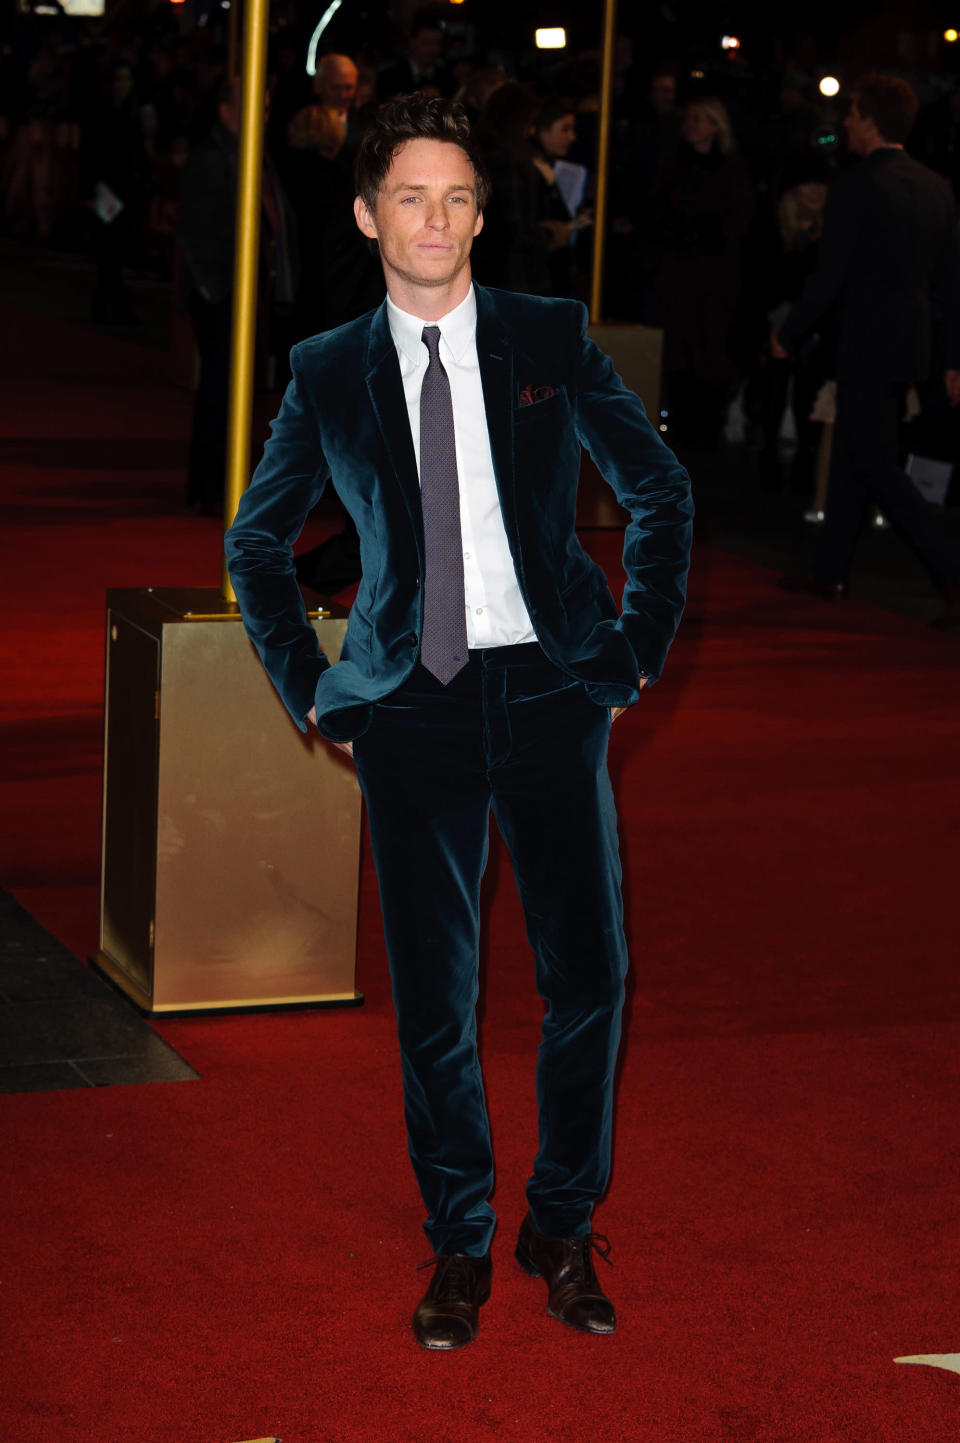 <b>Les Miserables World Premiere</b><br><br>Eddie Redmayne arrives at the ‘Les Miserables’ World Premiere in Leicester Square.